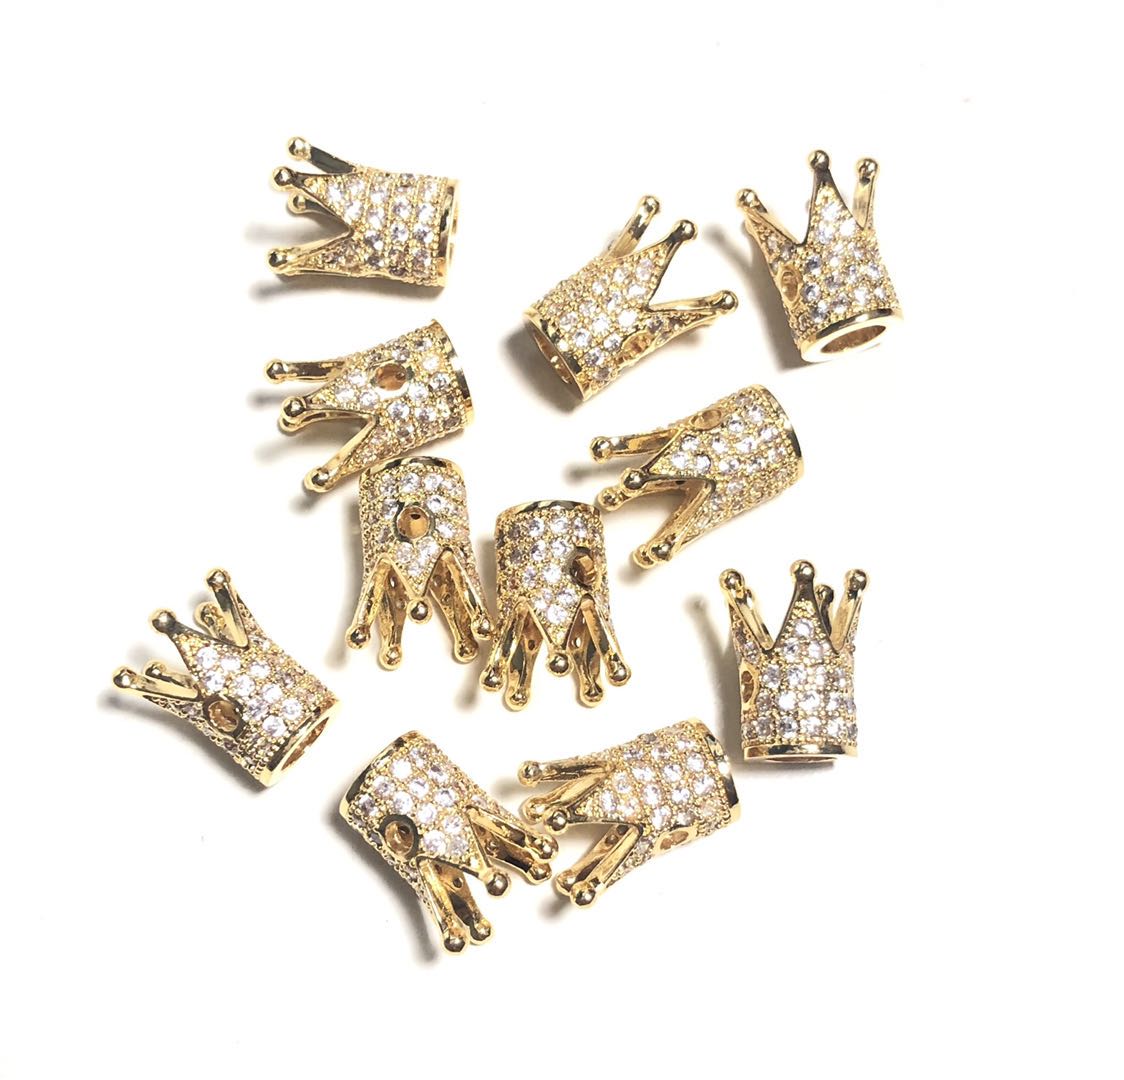 20pcs/lot 13*8mm Clear CZ Paved Crown Spacers Gold CZ Paved Spacers Crown Beads Charms Beads Beyond